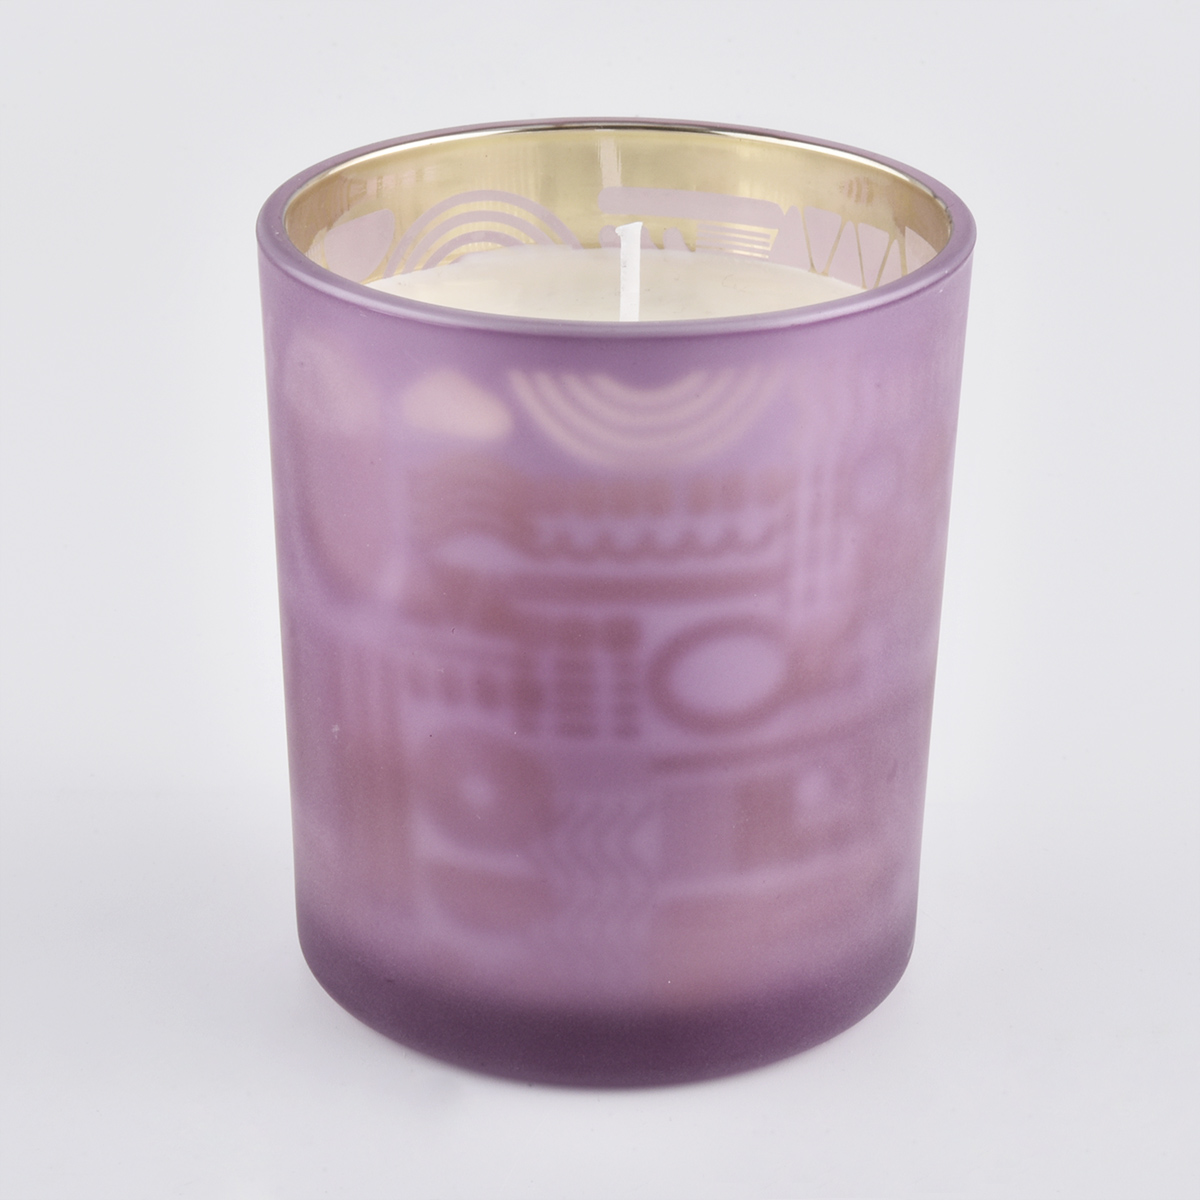 Frosted colored glass candle vessels na may laser pattern.